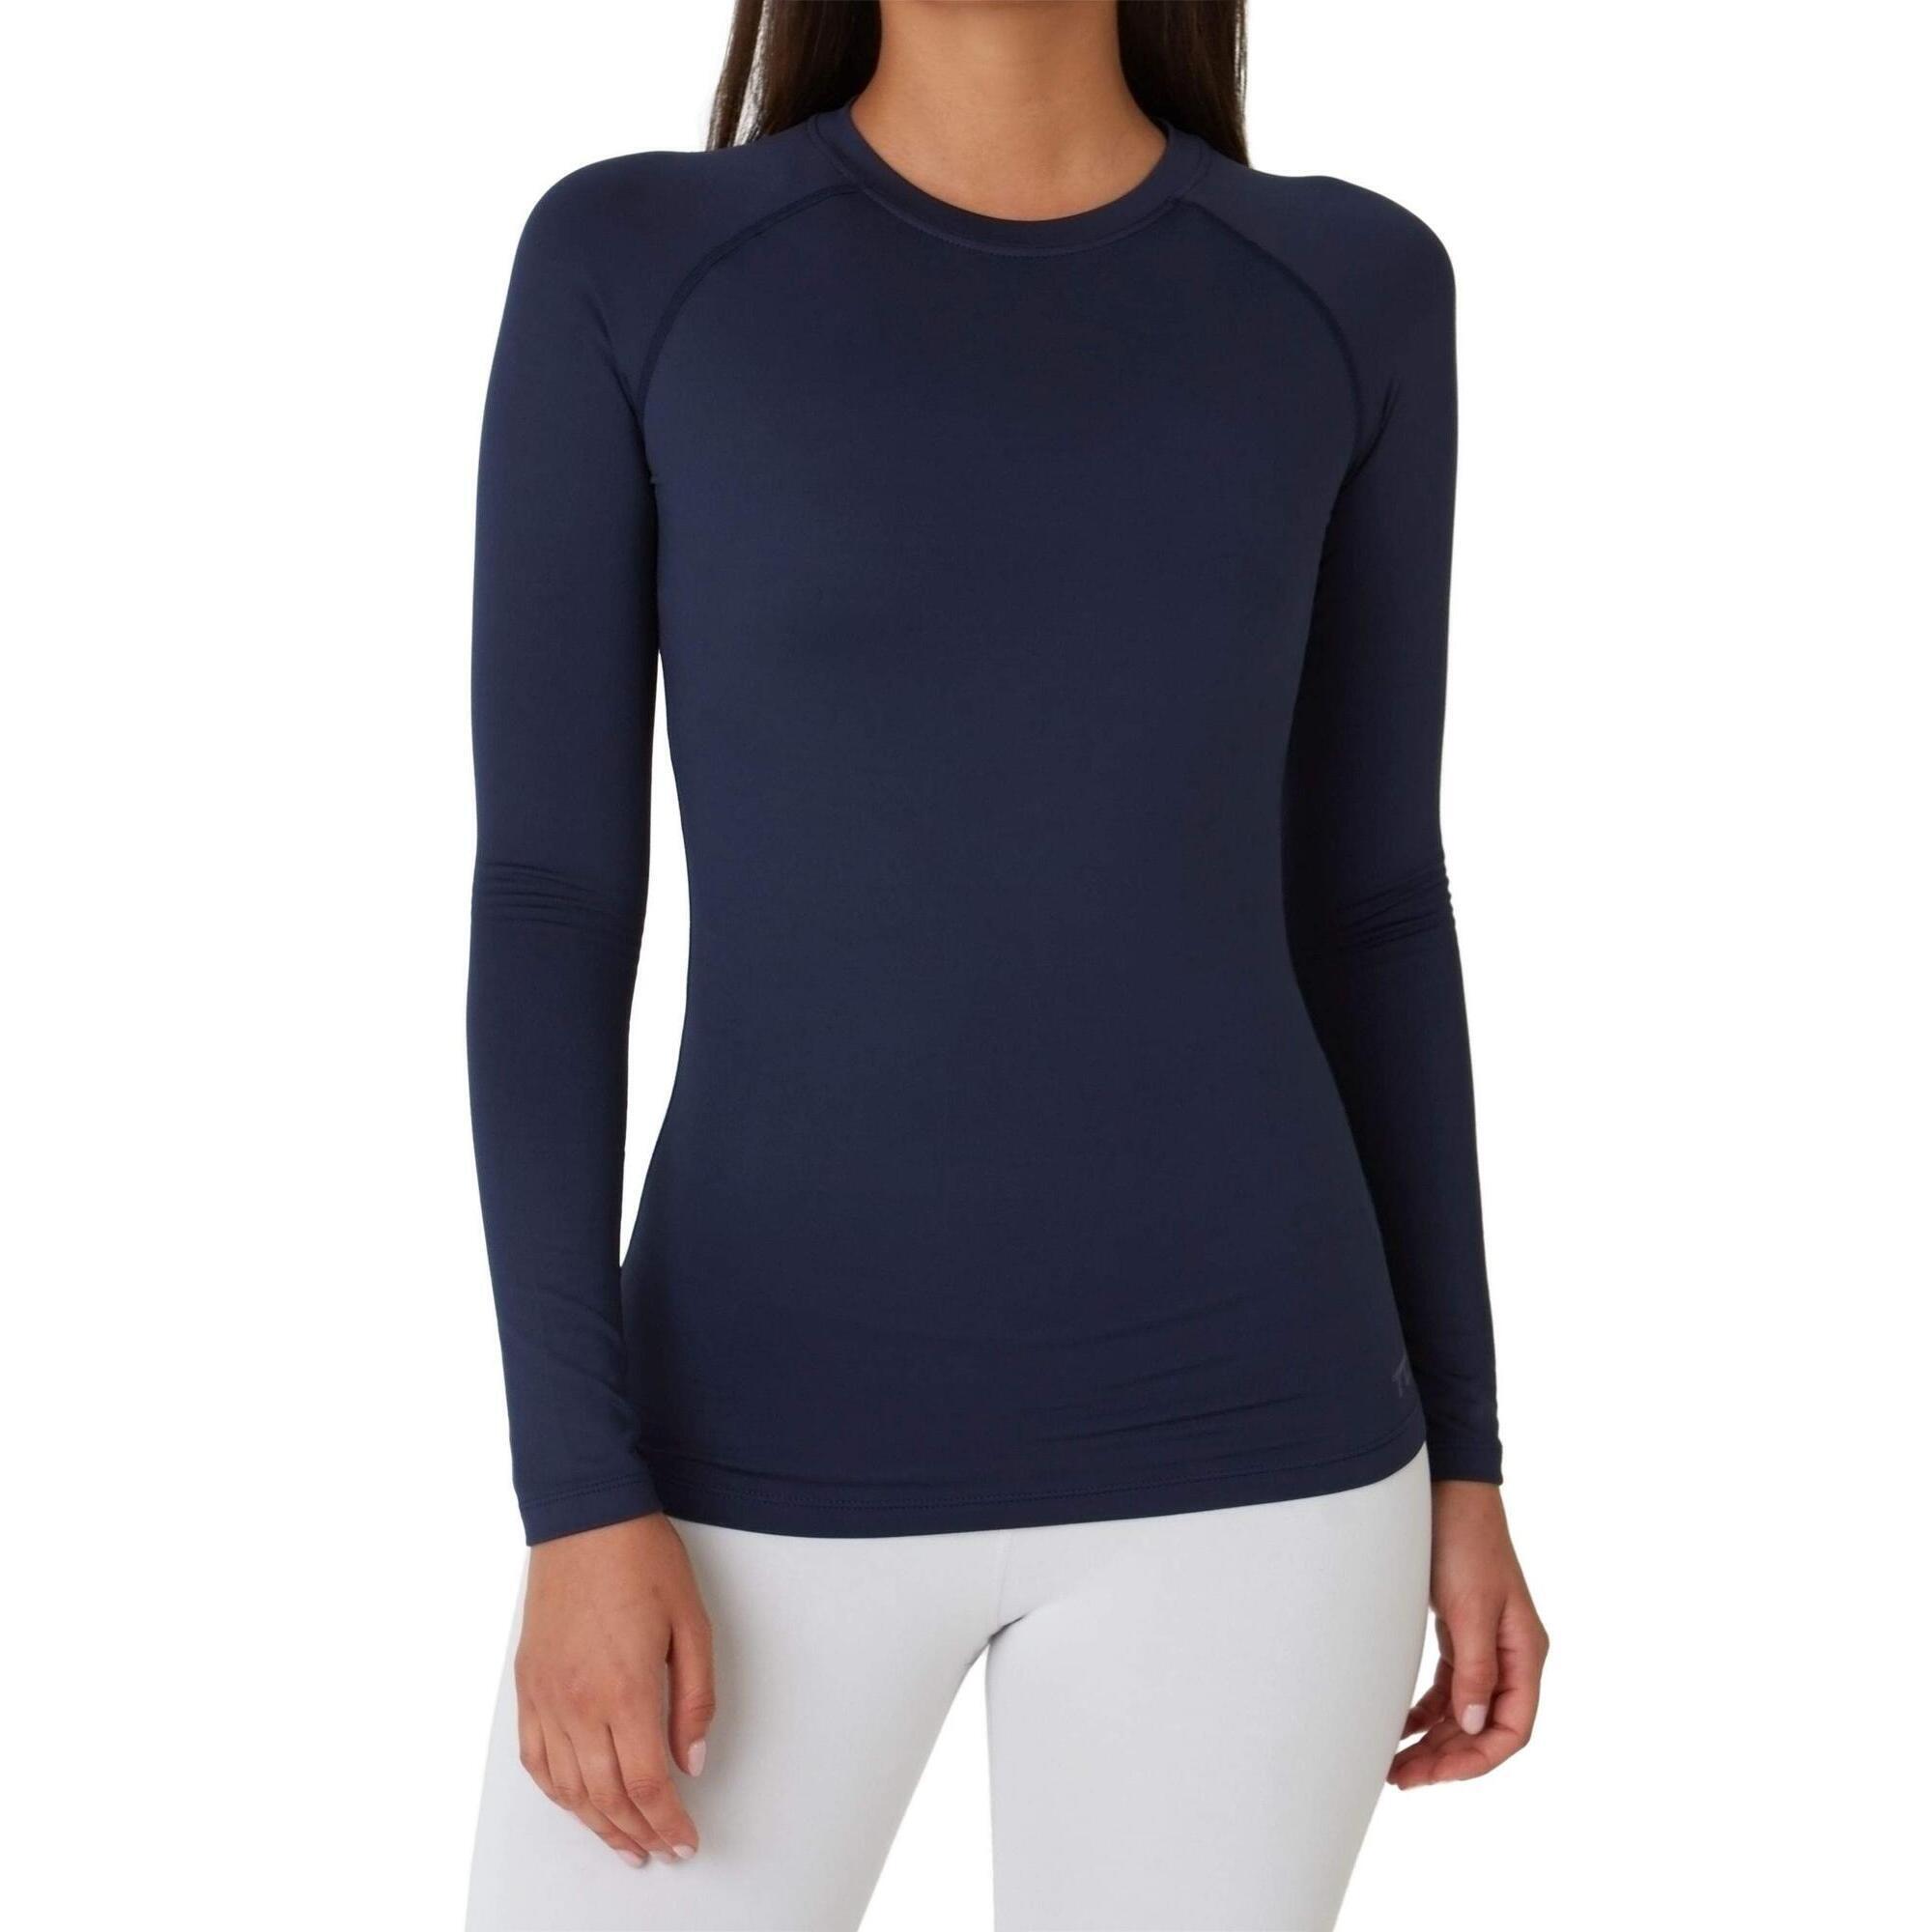 TCA Women's Super Thermal Base Layer Top - Navy Eclipse